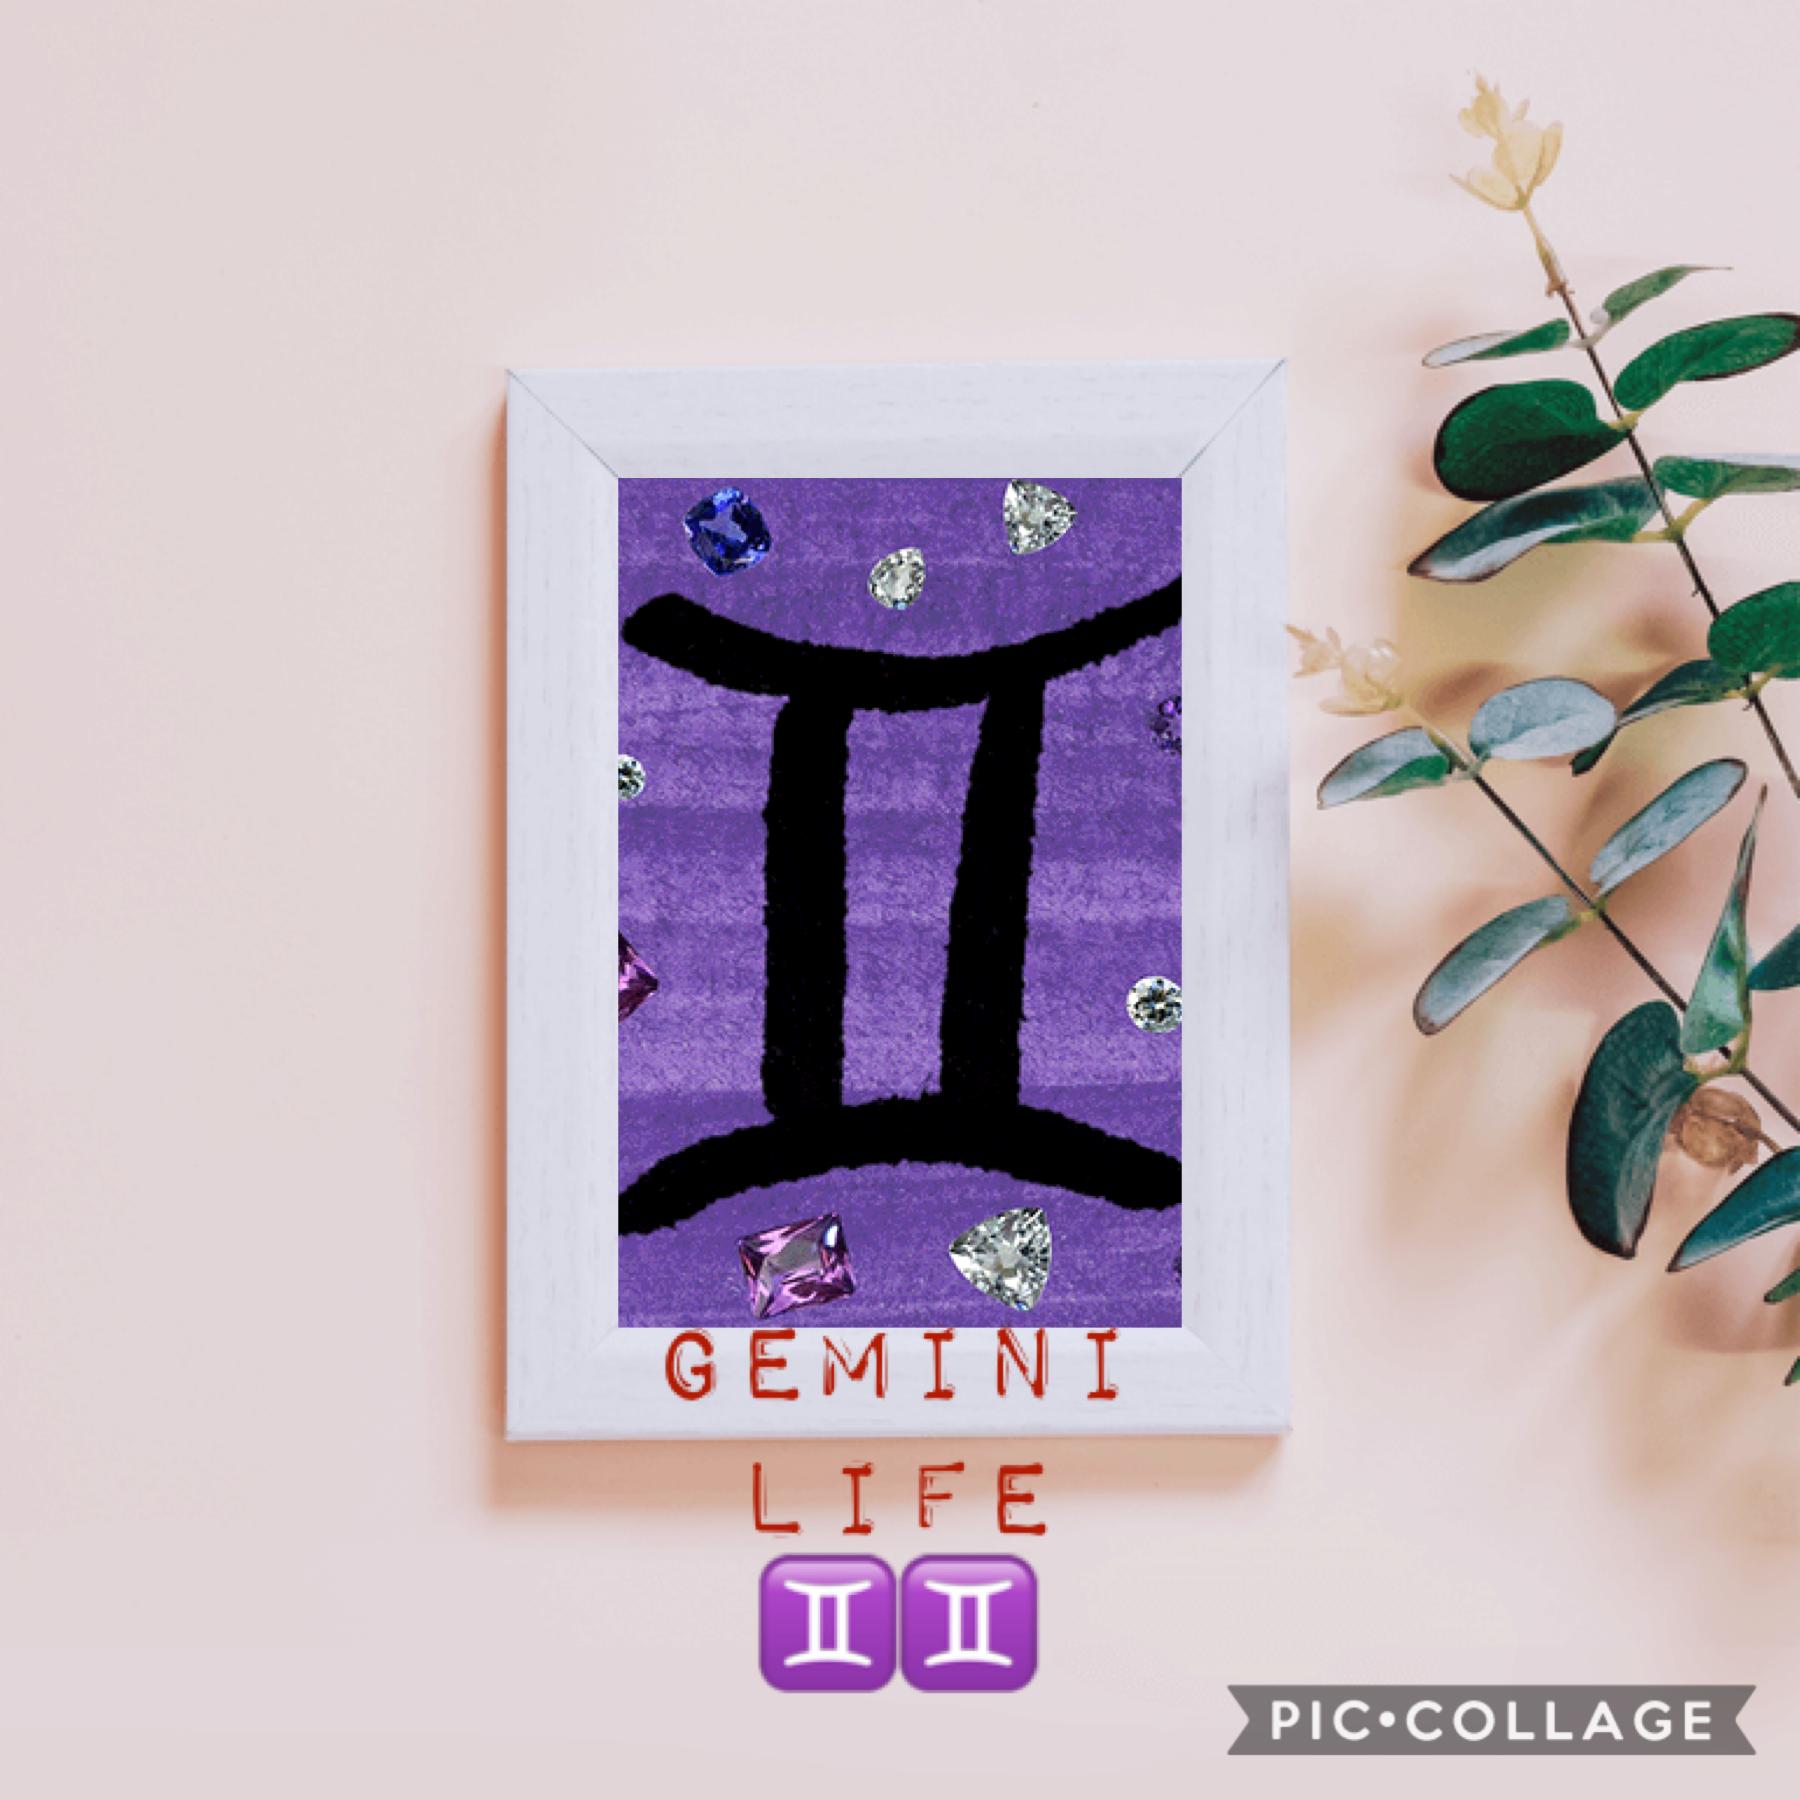 Gemini life, it is the best even if we are 2 faced...